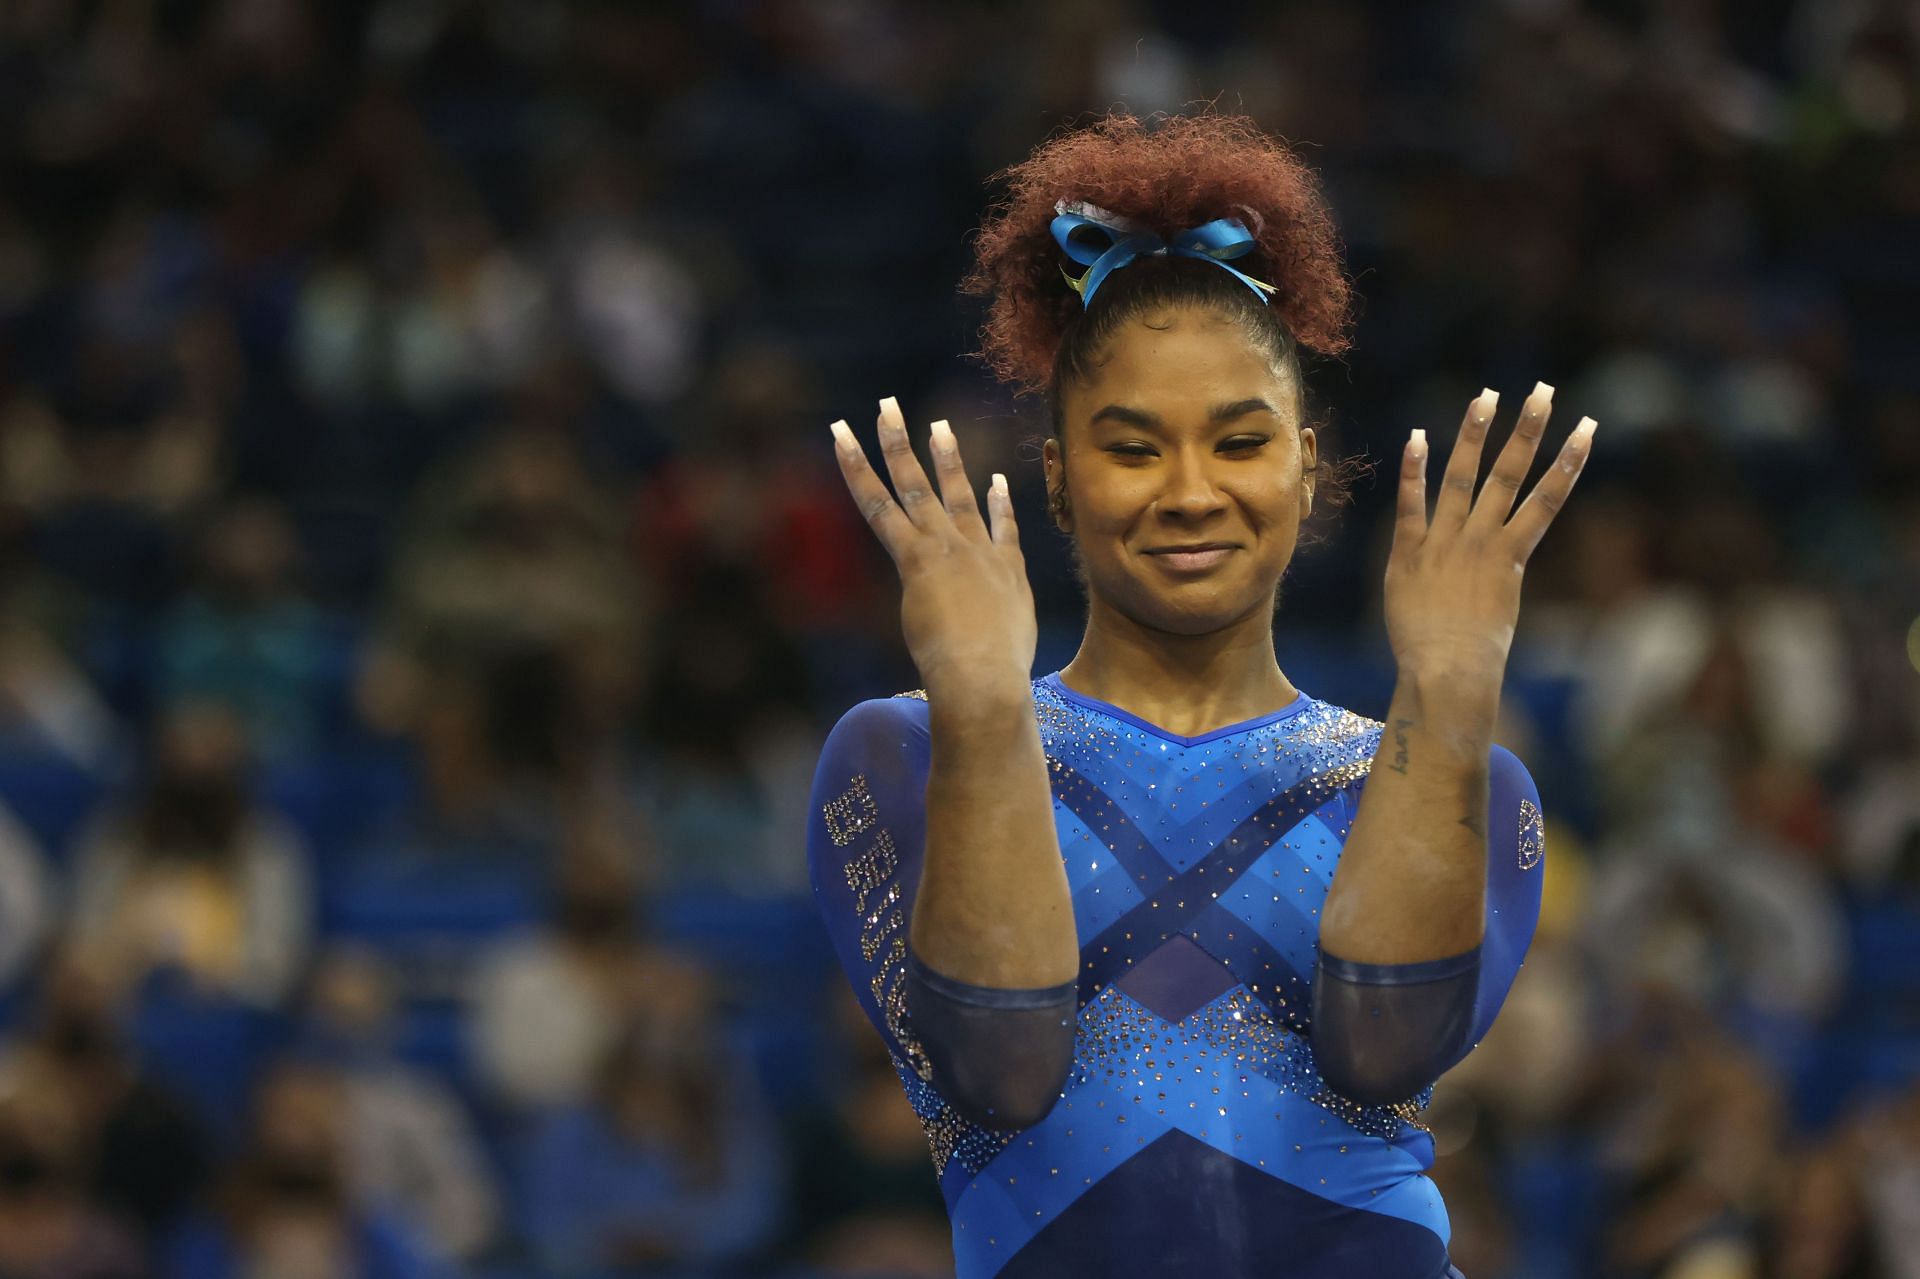 Jordan Chiles competes on beam against the Arizona Wildcats at UCLA Pauley Pavilion on January 30, 2022 in Los Angeles, California.